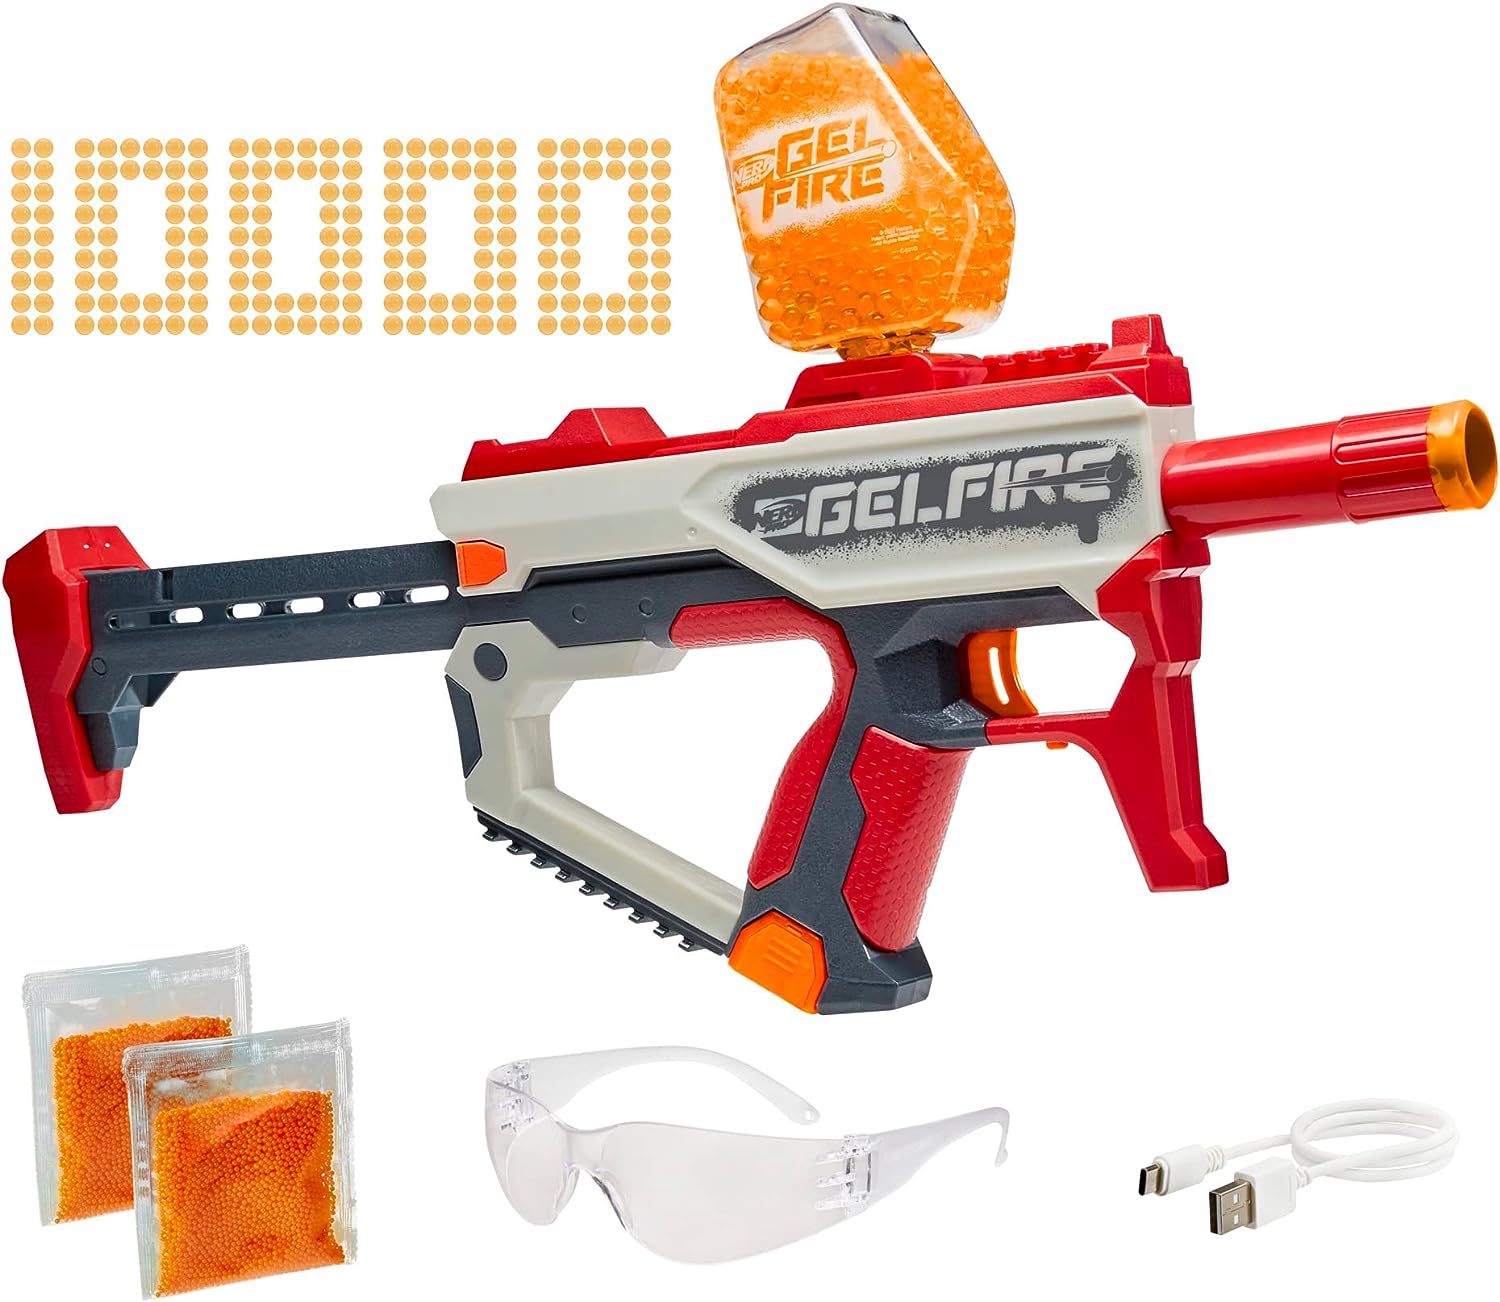 A Nerf Pro Gelfire Mythic Full Auto Blaster gun with 10,000 Gelfire Rounds.